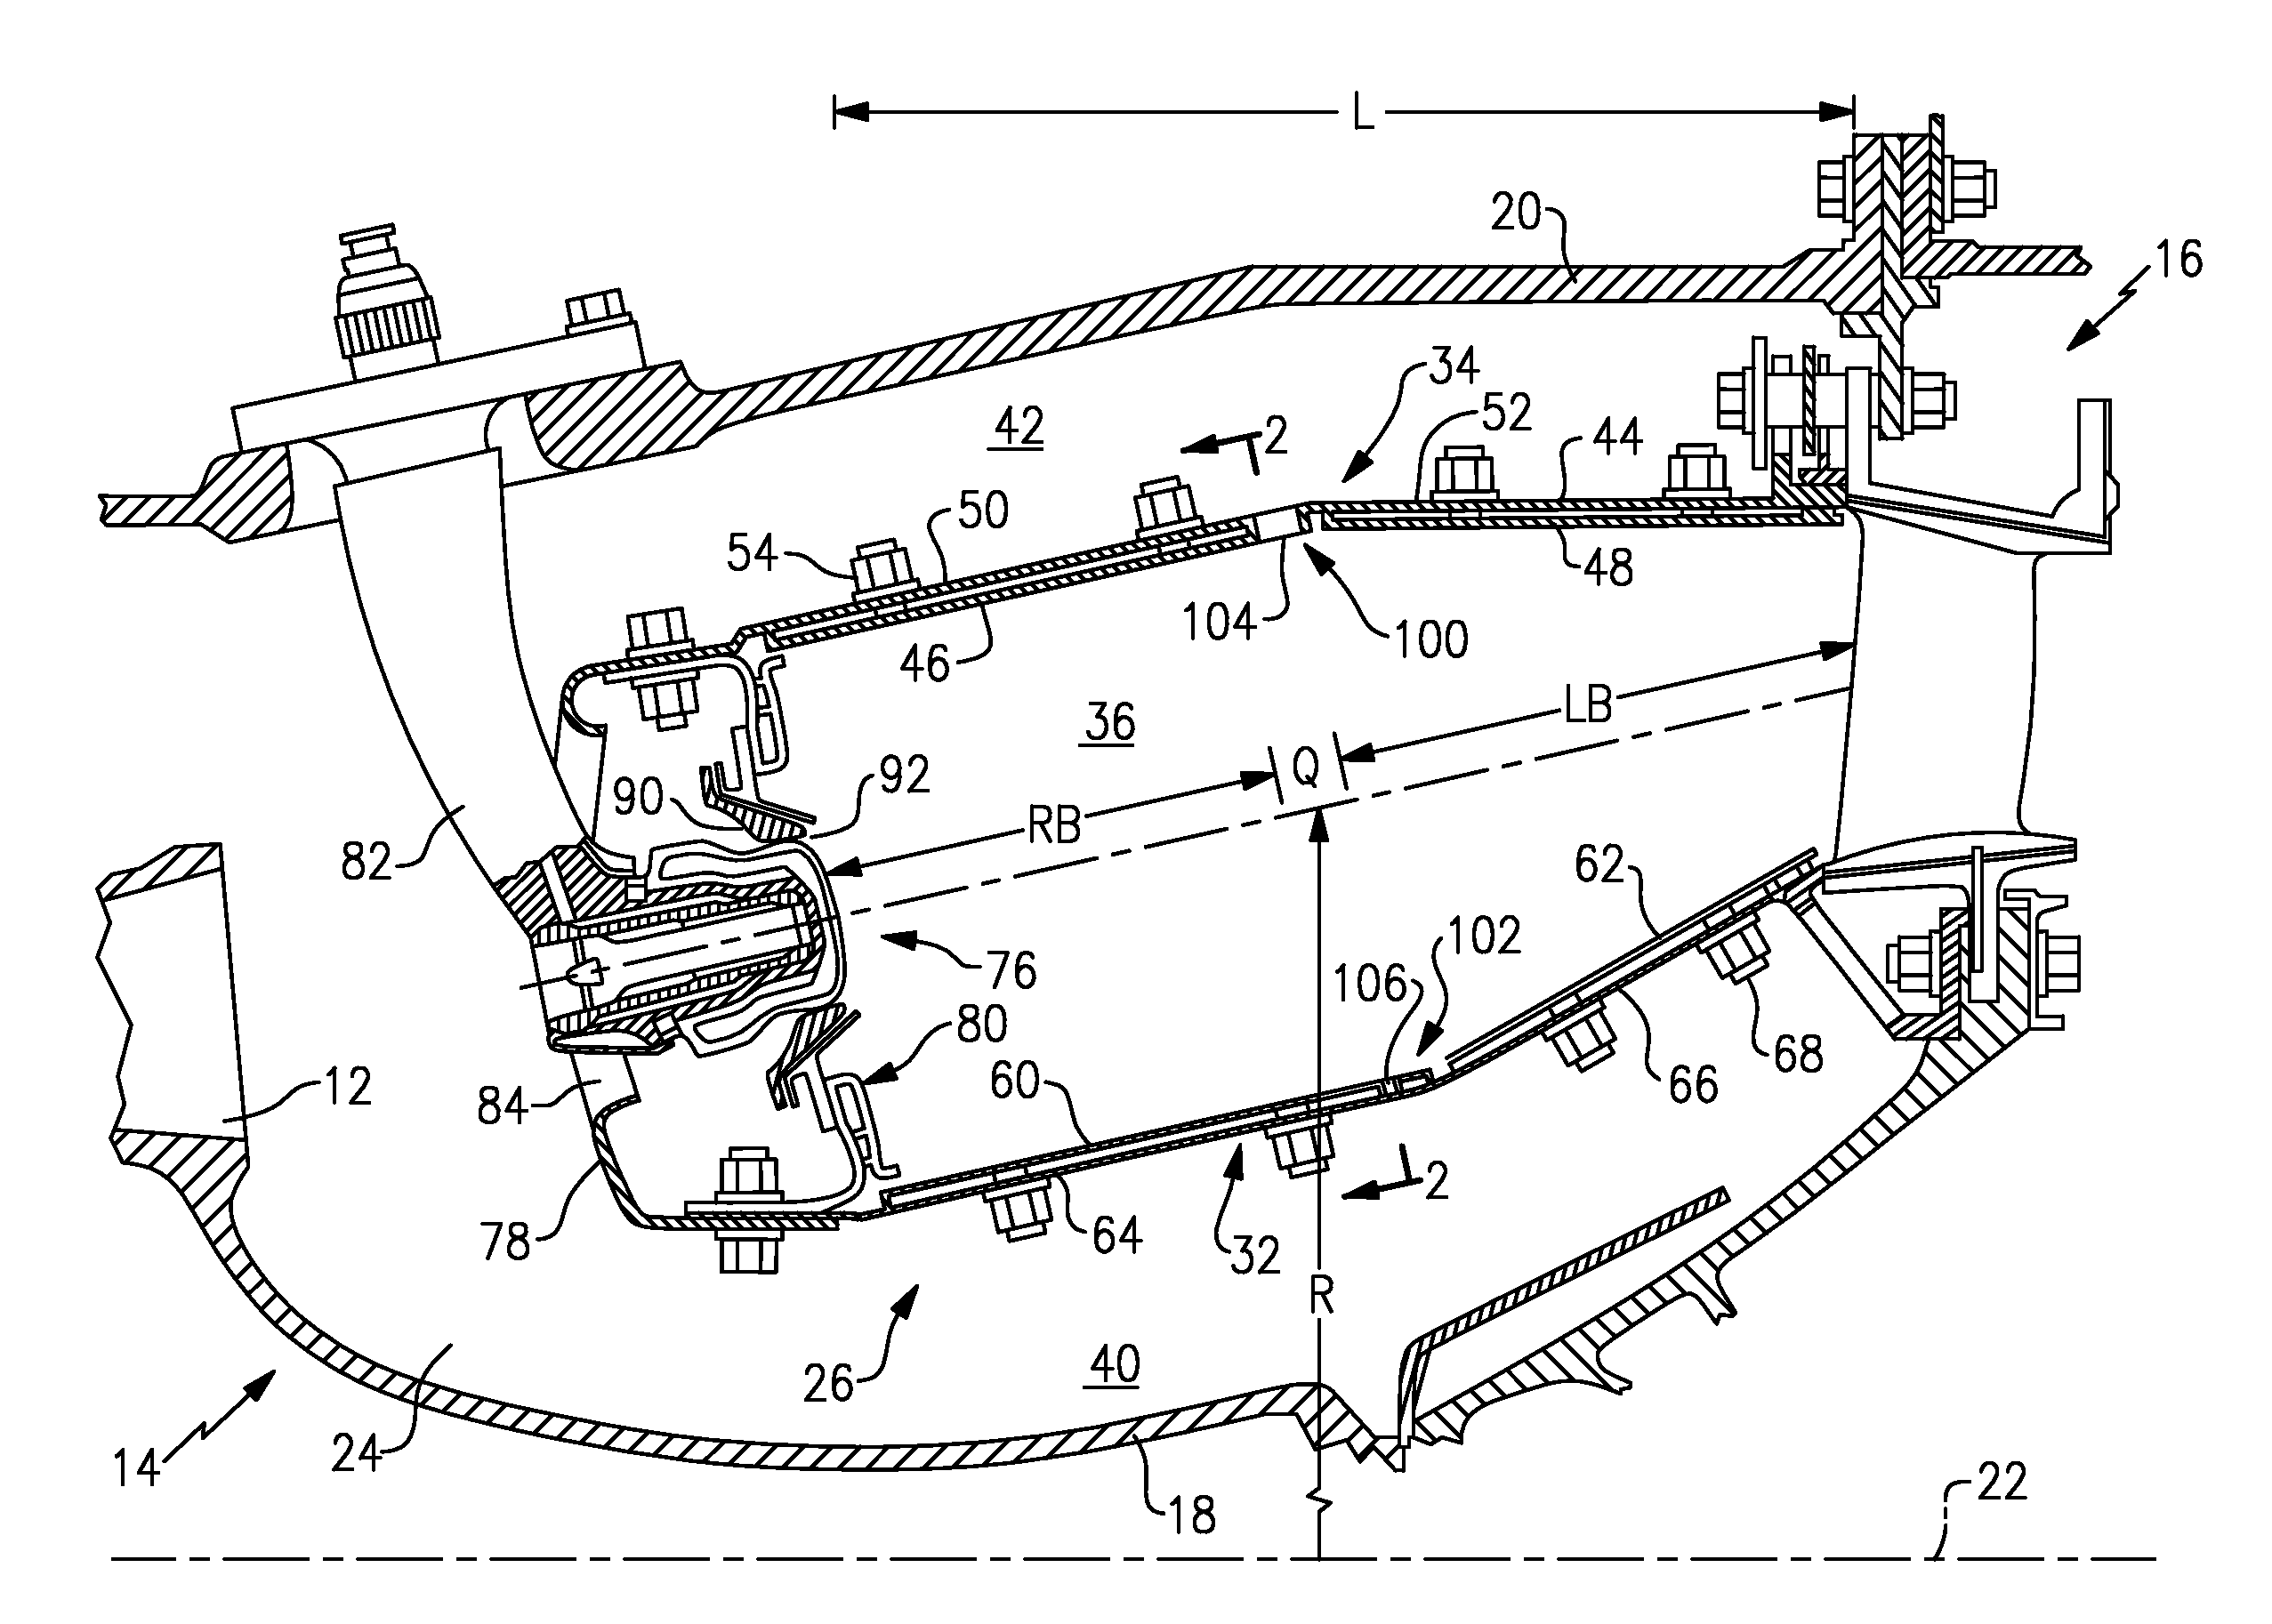 Hole pattern for gas turbine combustor